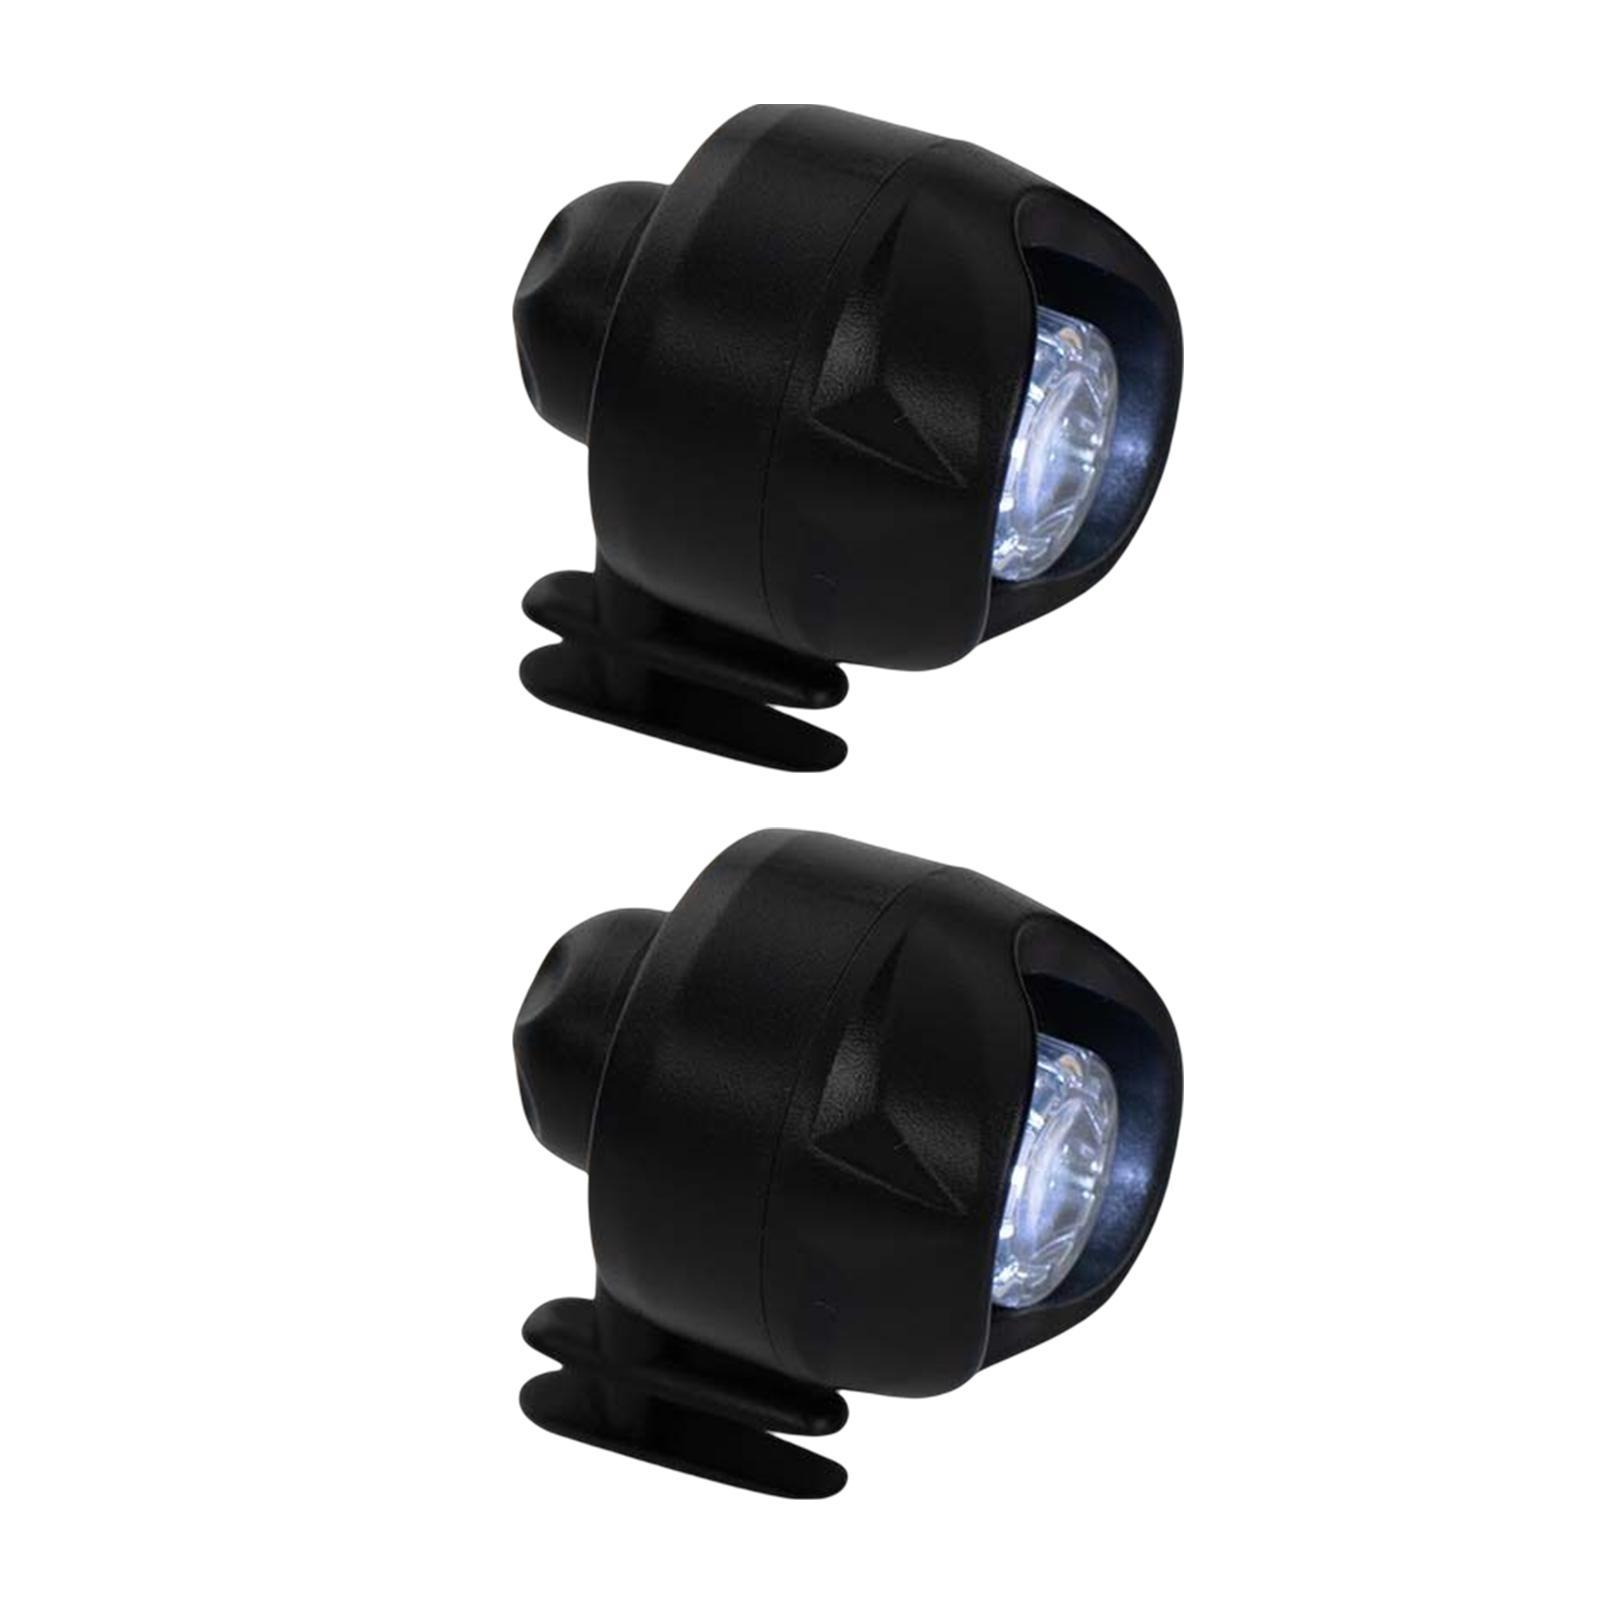 Holey Shoes Headlights with 3 Light Modes for Camping Lighting Accessories